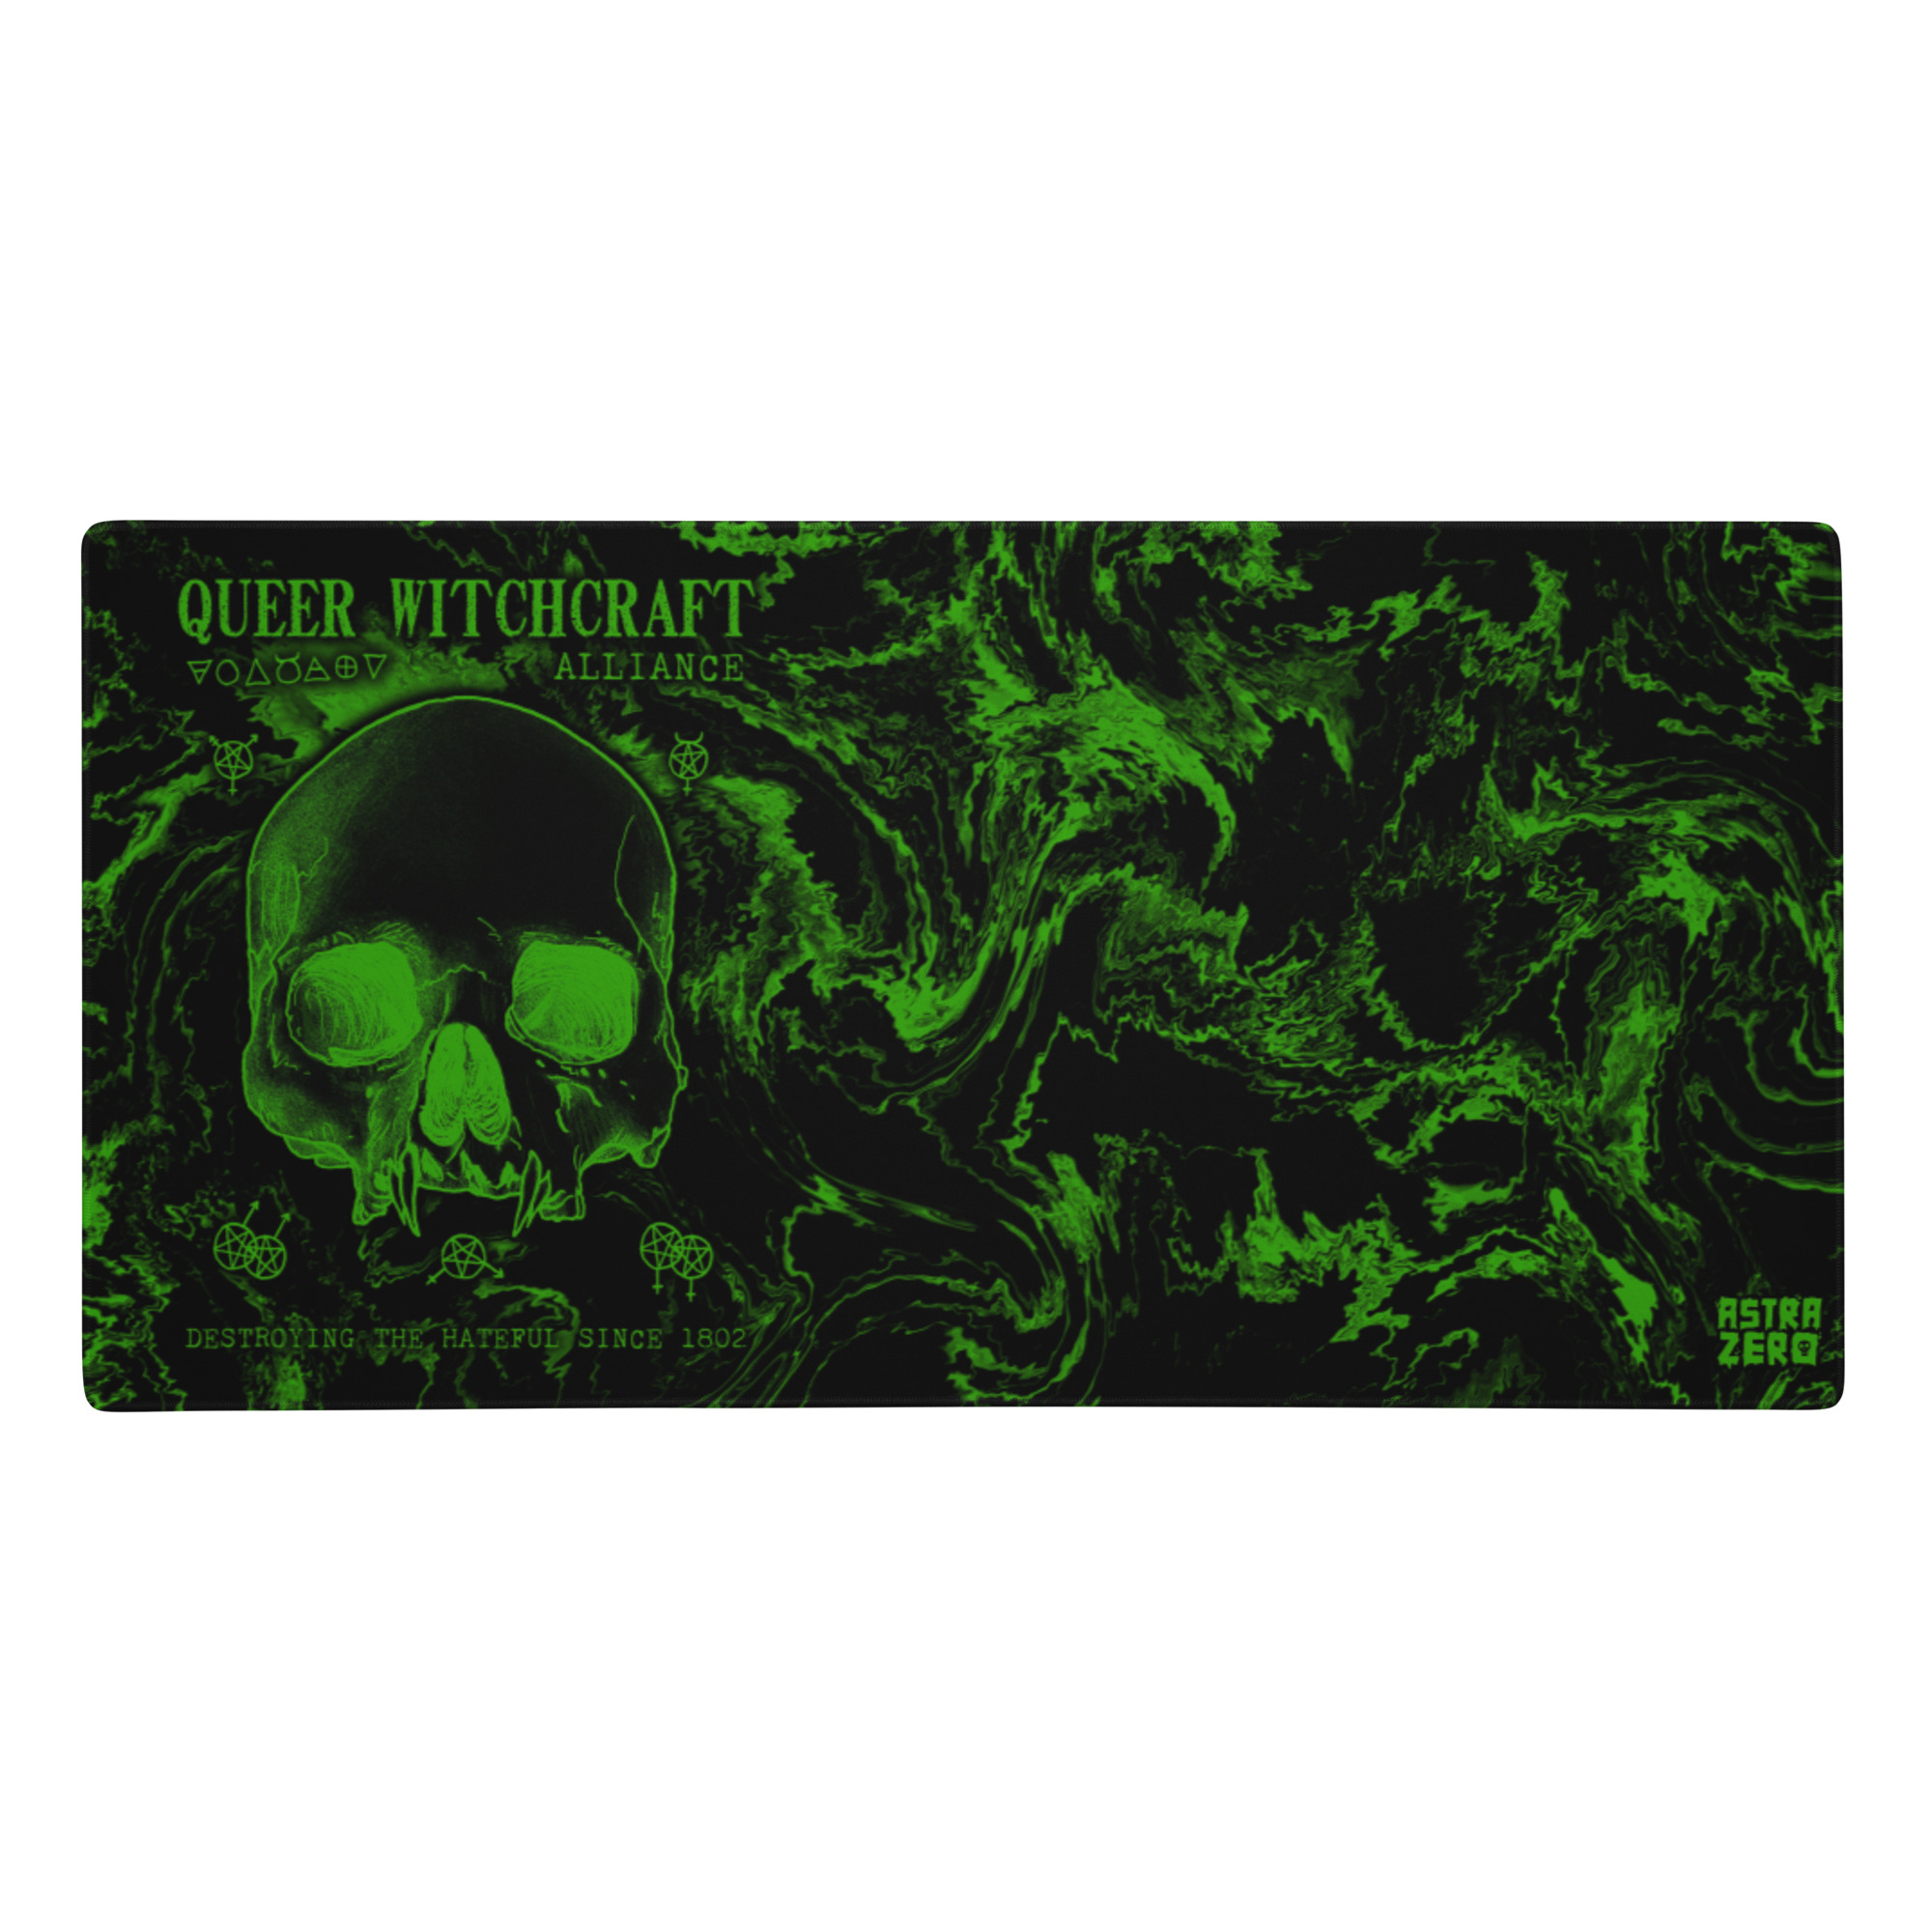 Featured image for “Queer Witchcraft - acid green - Gaming mouse pad”